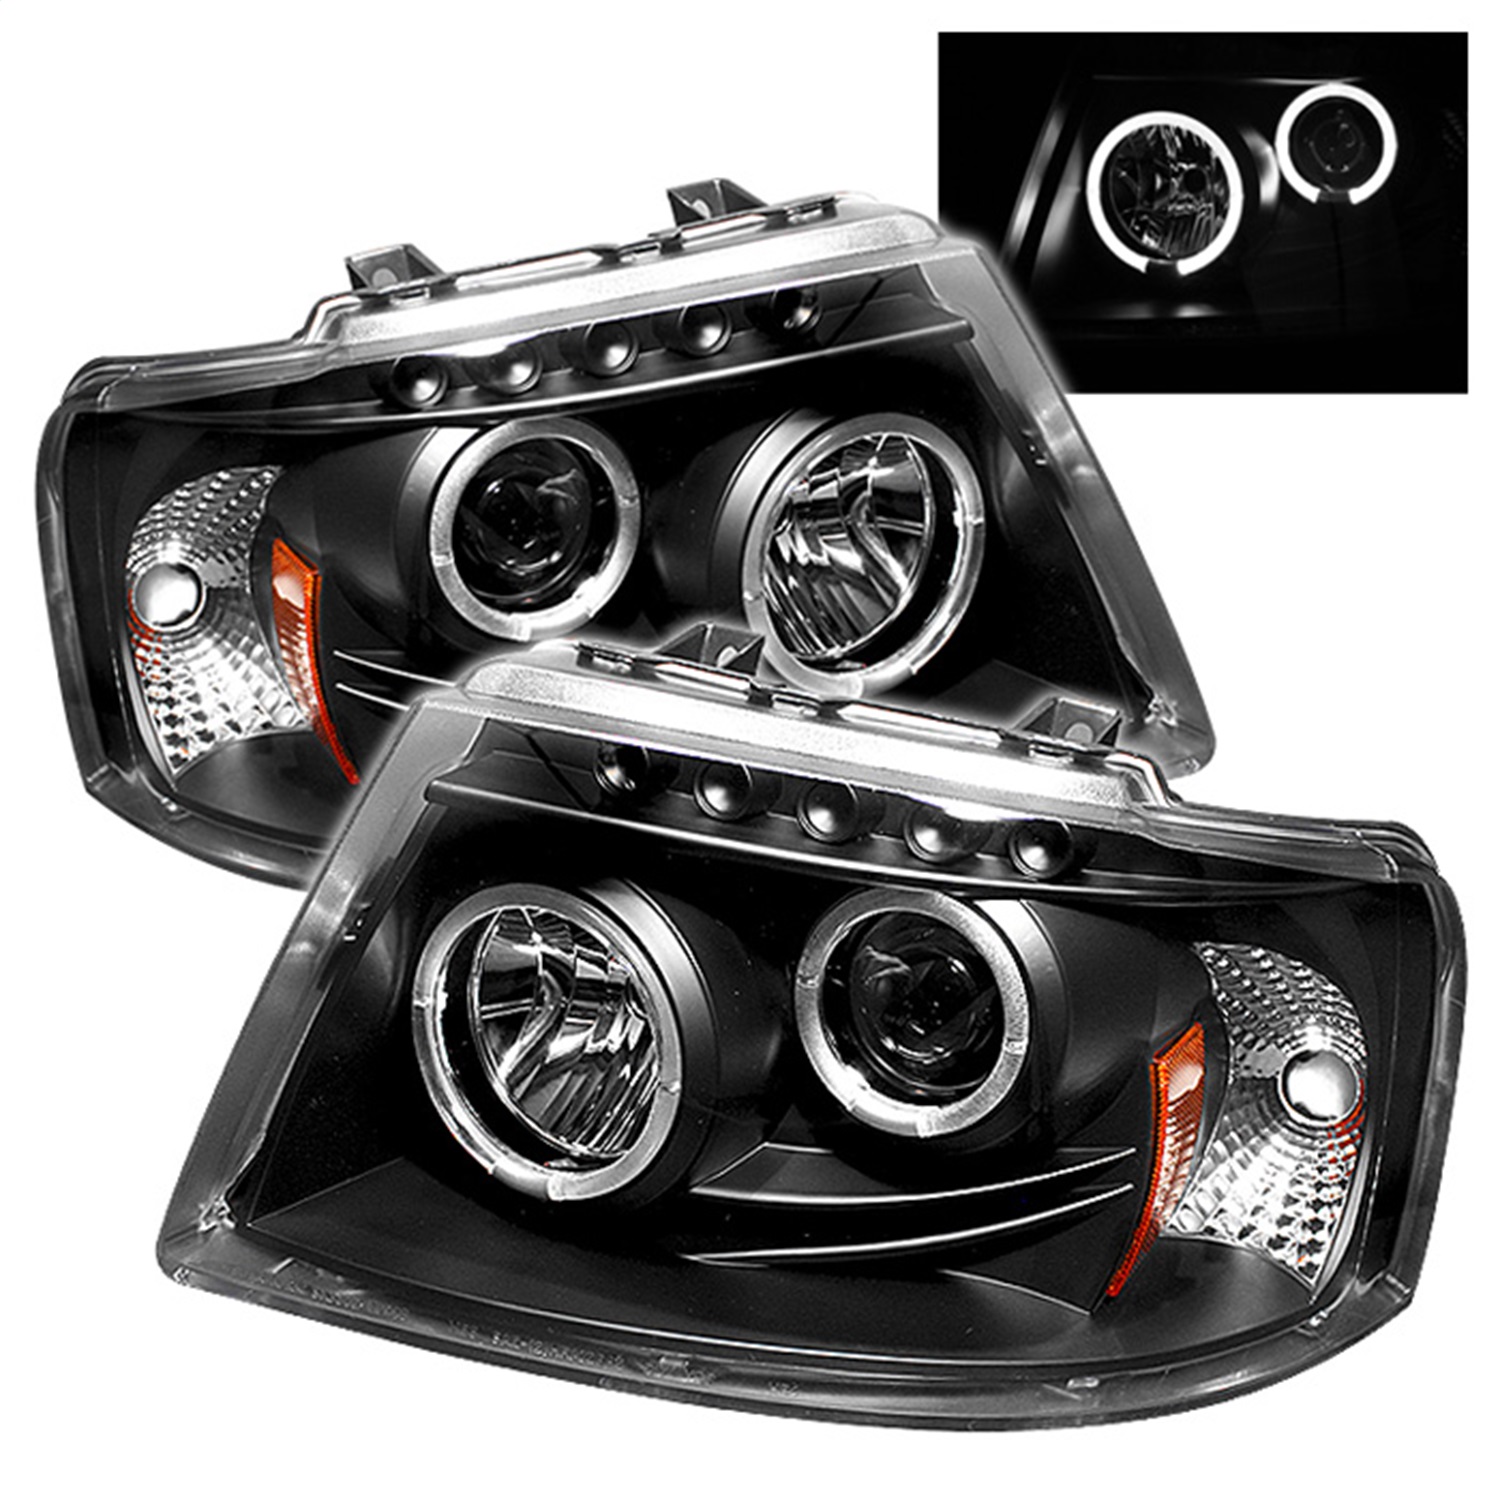 Spyder Auto 5010117 Halo LED Projector Headlights Fits 03-06 Expedition